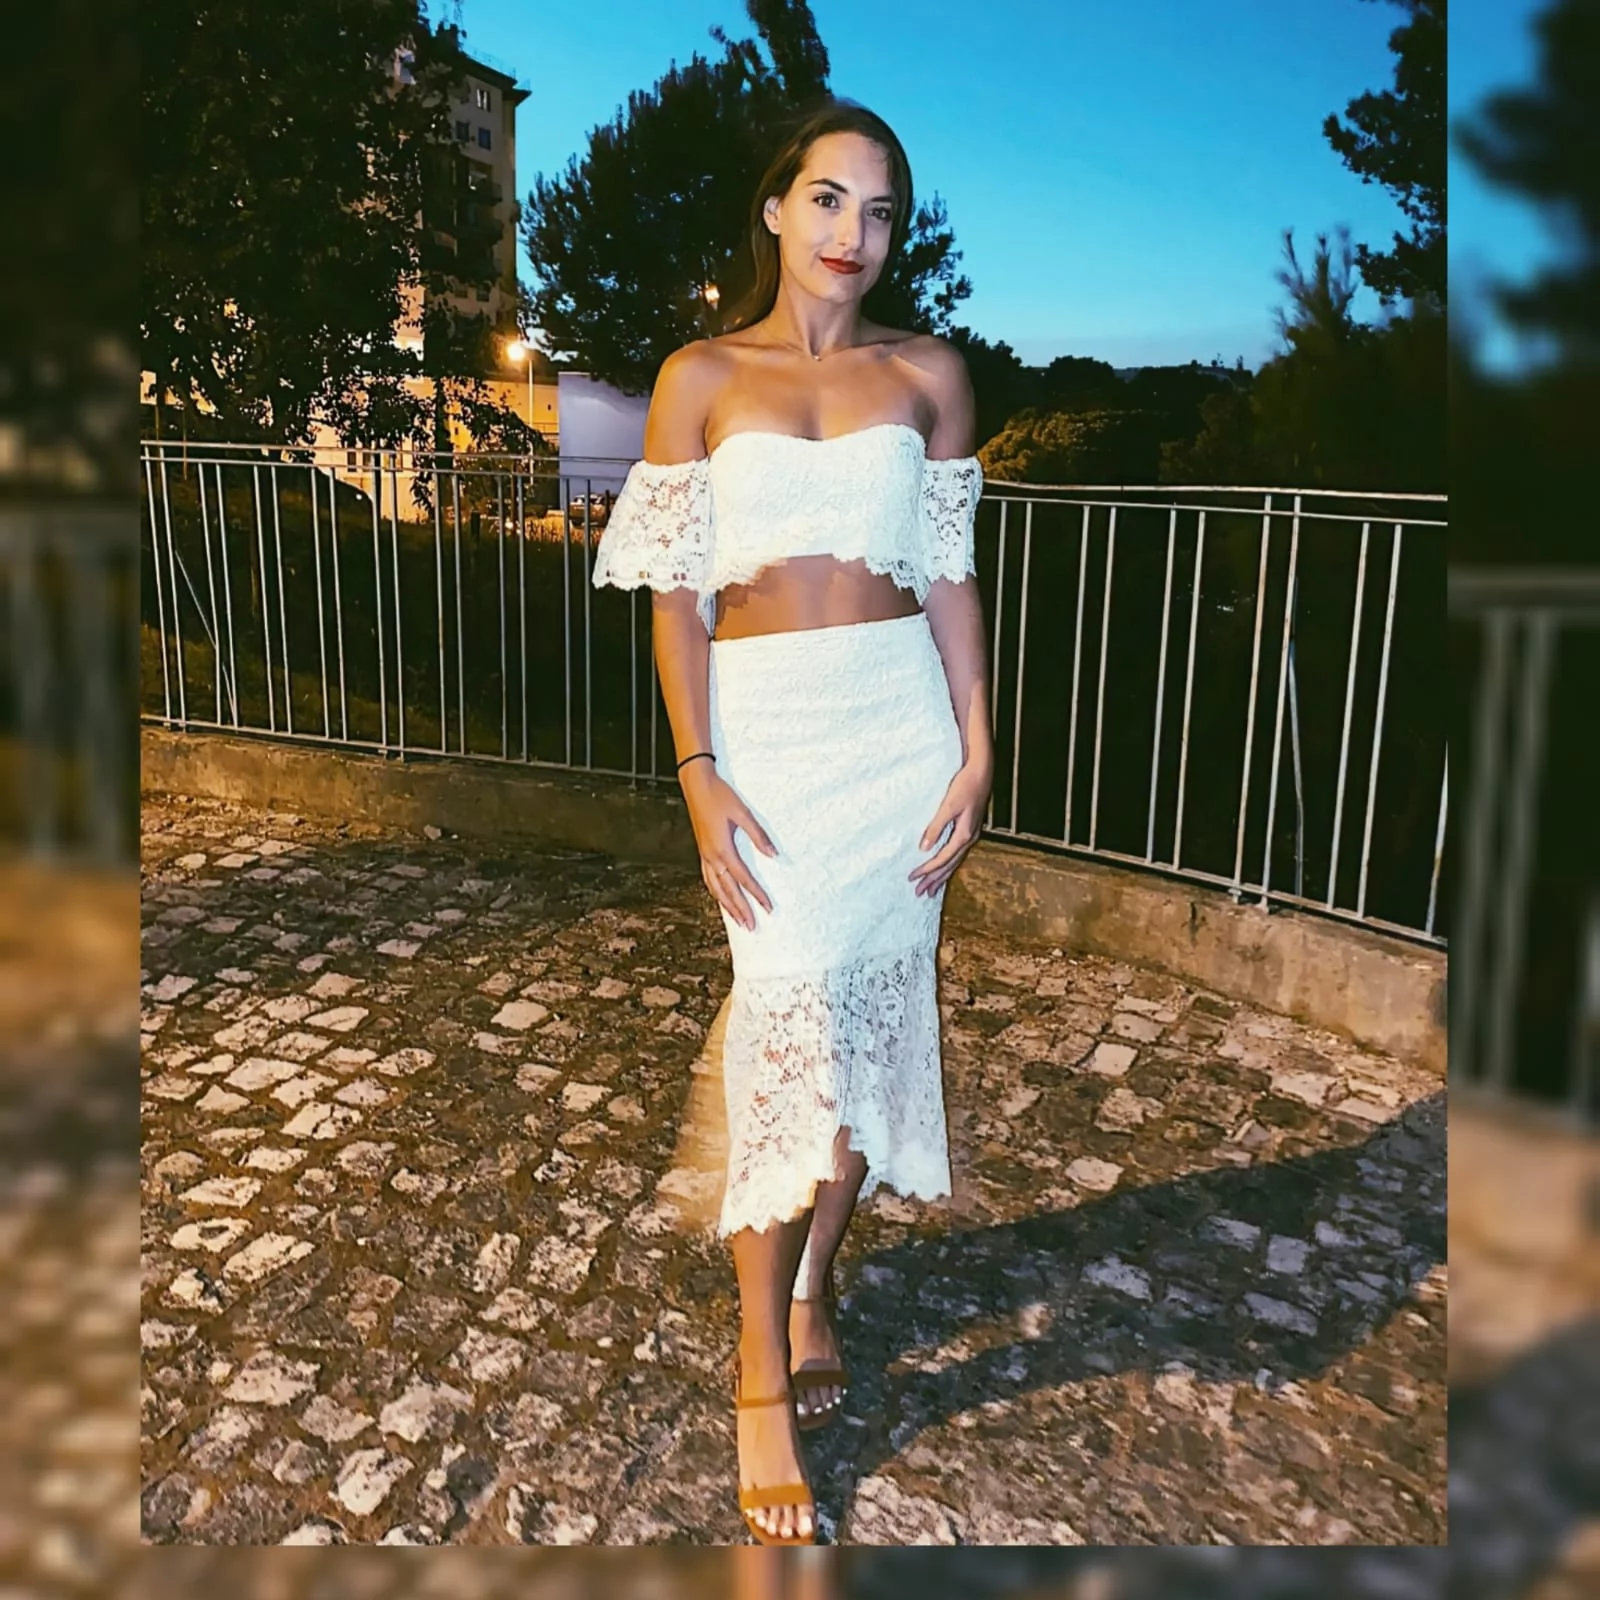 ? fun white lace 2 piece outfit  ? 4 <blockquote>"The most beautiful thing that a women can wear is her own confidence ."</blockquote> This smart casual 2 piece dress was designed and made for my client's birthday dinner here in Portugal Lisbon  ? A fun white lace 2 piece outfit , with an off shoulder lace crop top and a hi - lo lace skirt . A versatile outfit as for example, the top can be worn several times with jeans, pants etc . #passion4fashion #mariselaveludo #2piecedress #croptop #whitelaceoutfit #lace #fashion #custommadedress #personalizeddress #smartcasualoutfit